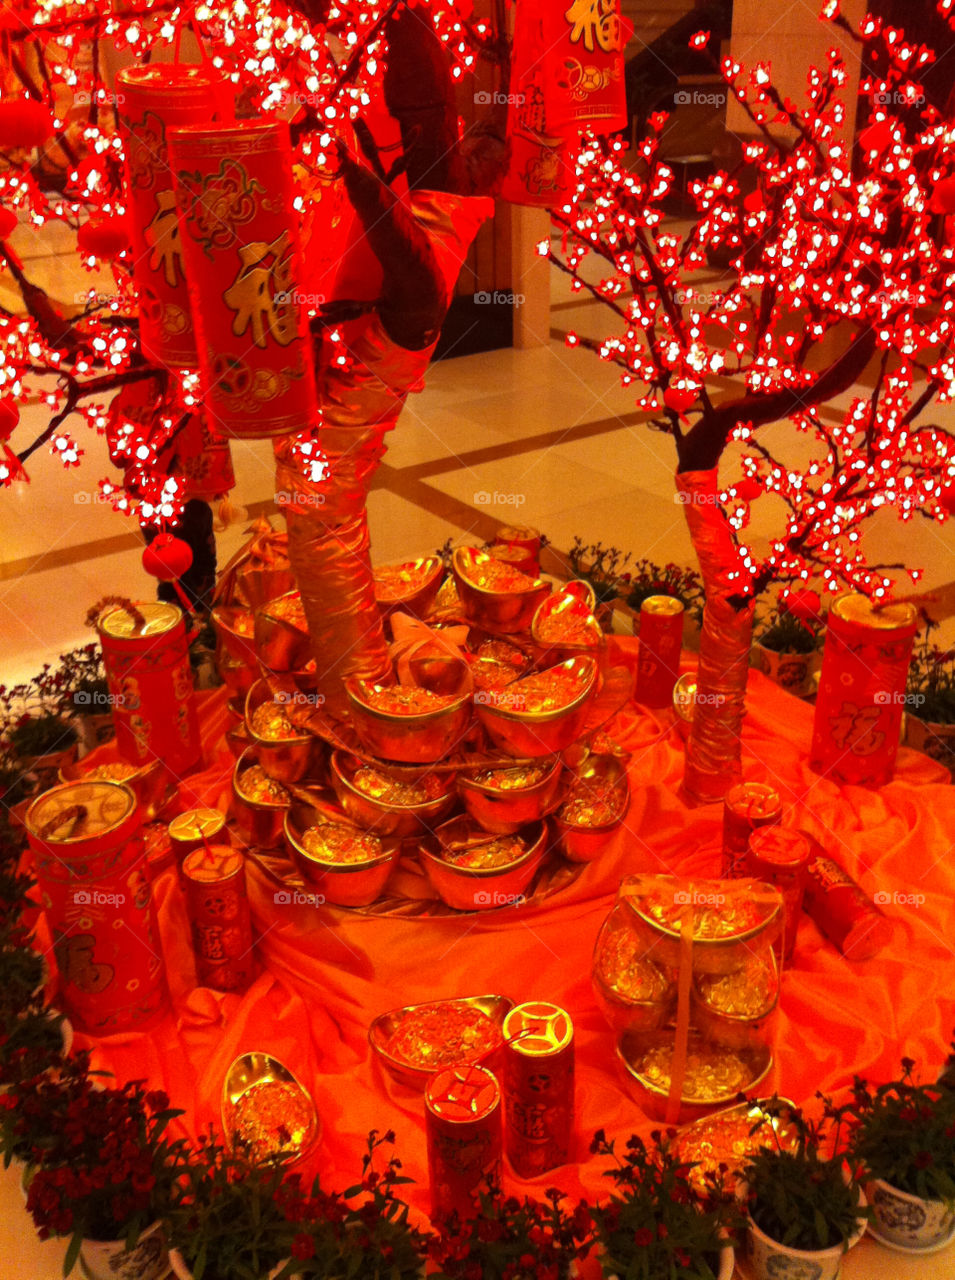 A display ushering in the Chinese New Year.